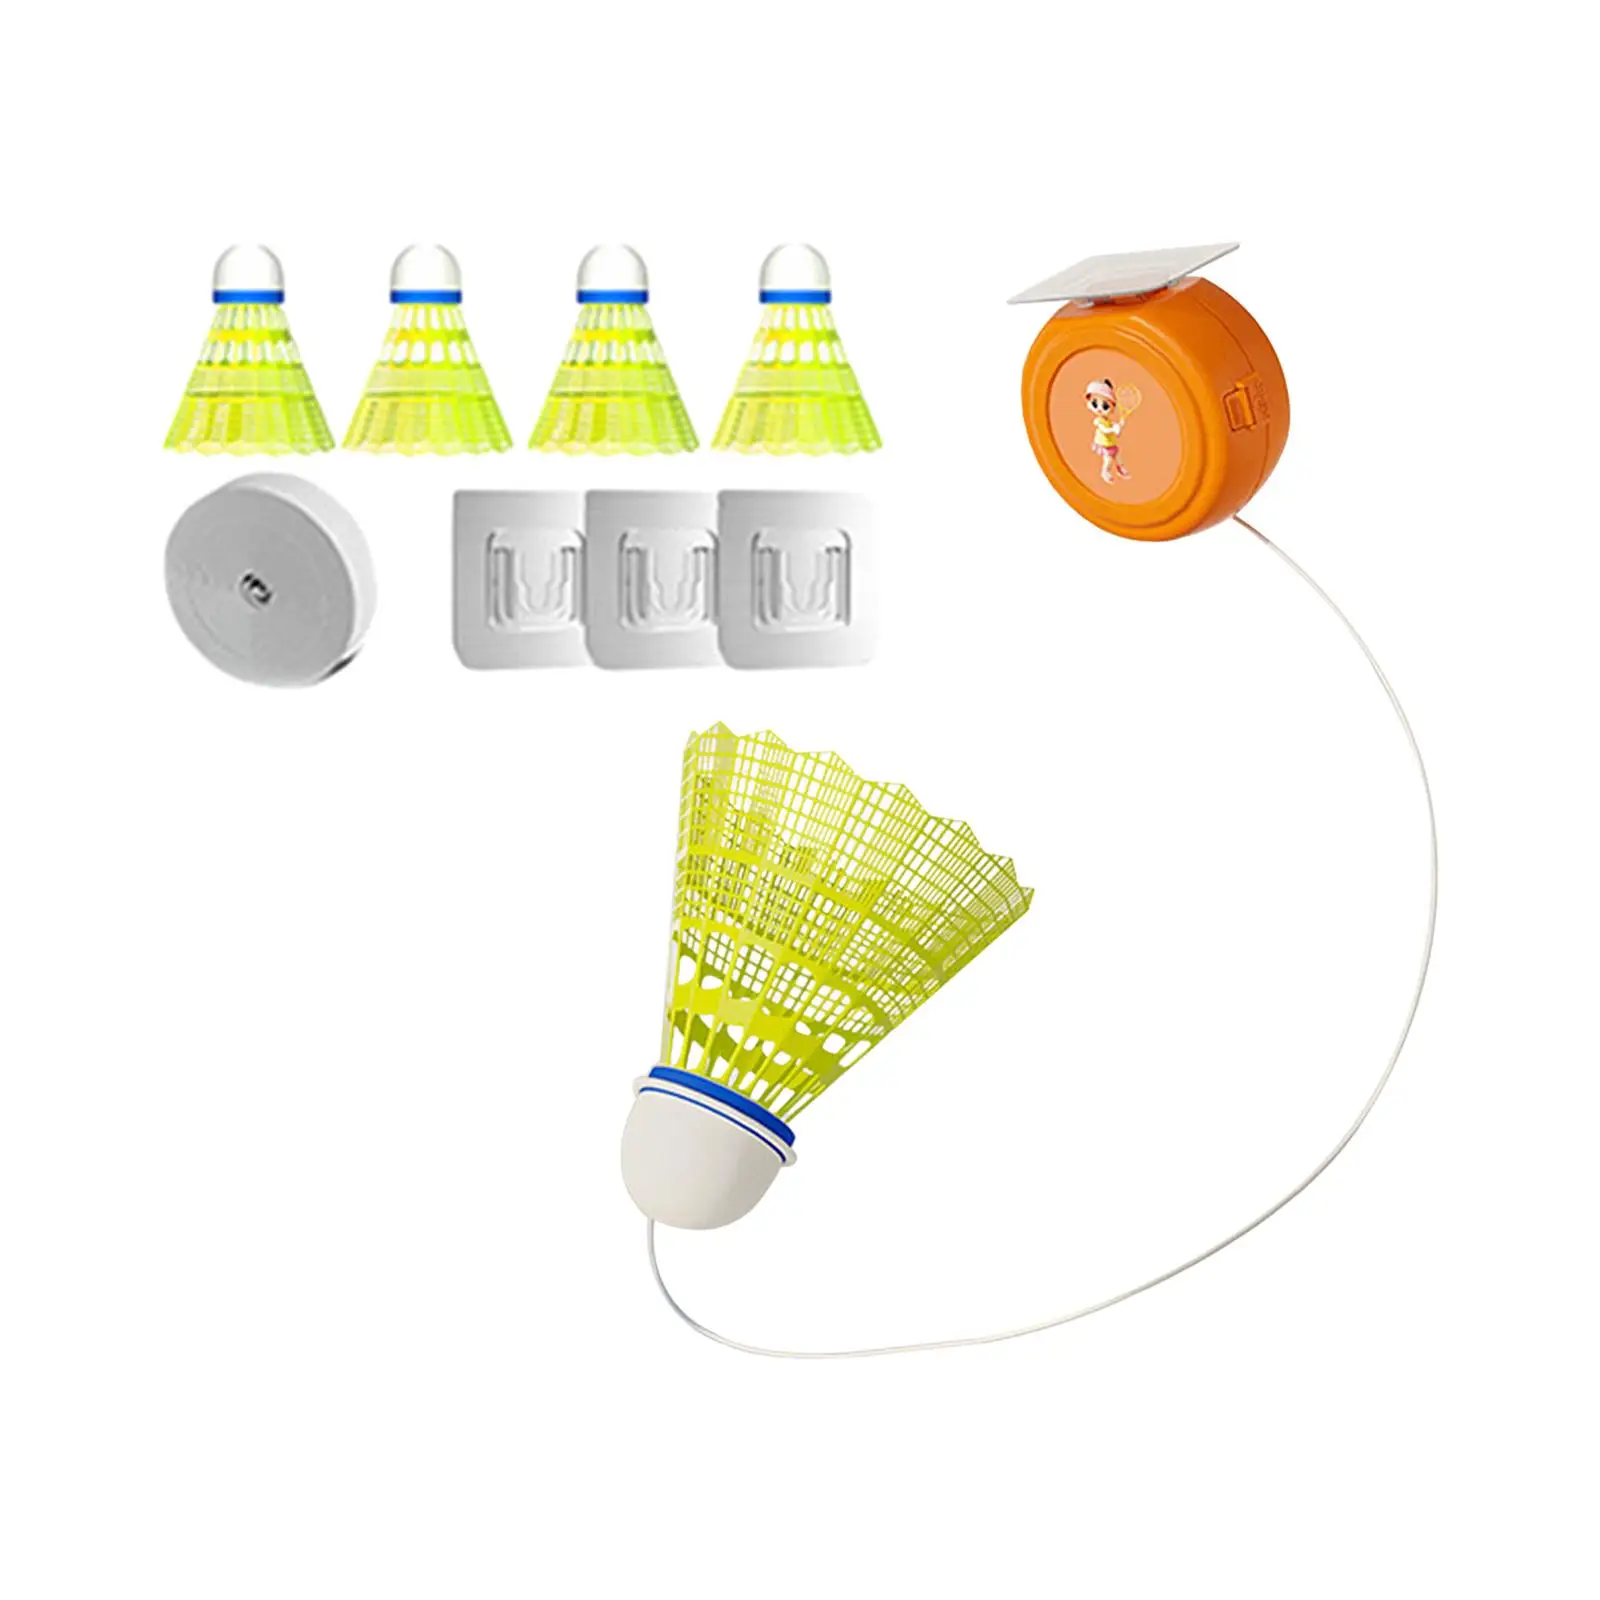 Indoor Badminton Trainer with Badminton Shuttlecock Aid Badminton Training Device Solo Practice for Home Sports Fitness Exercise